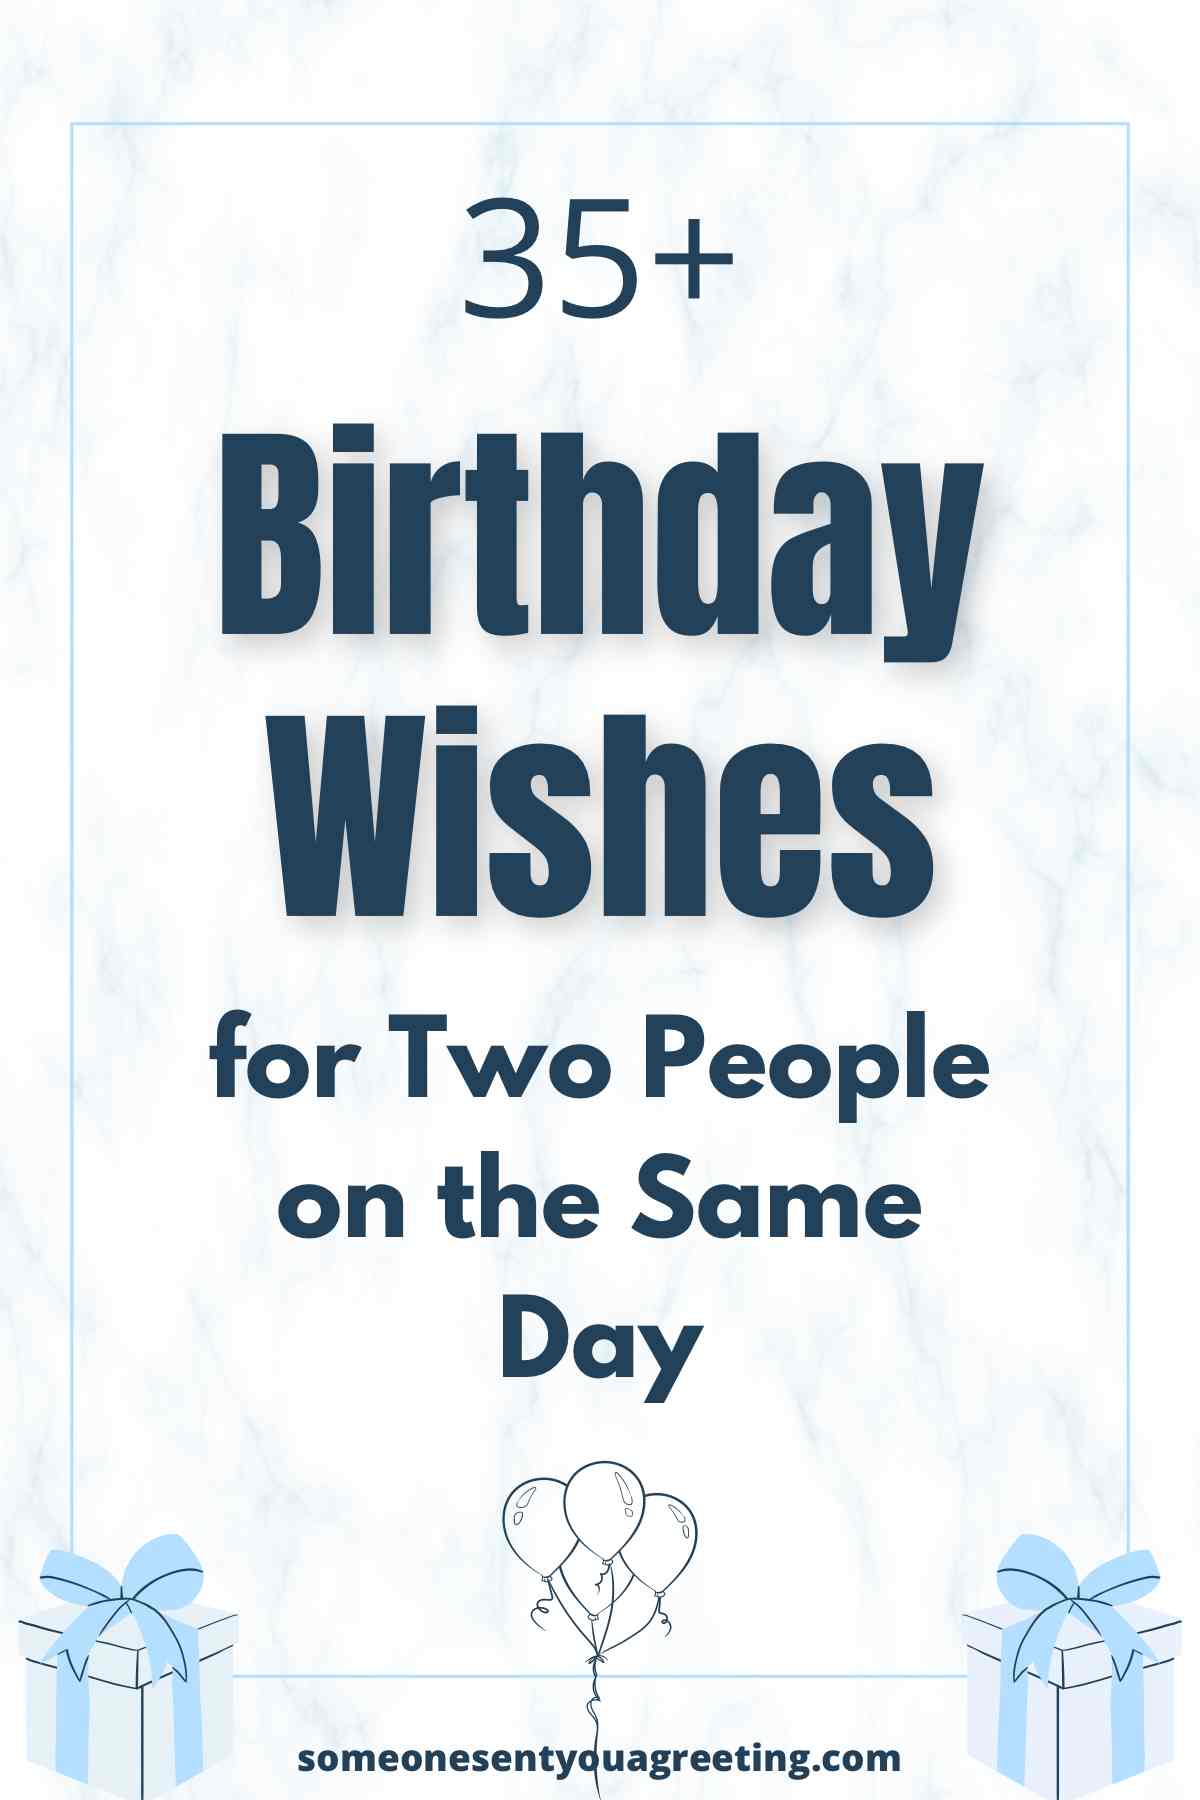 birthday wishes for two people on the same day